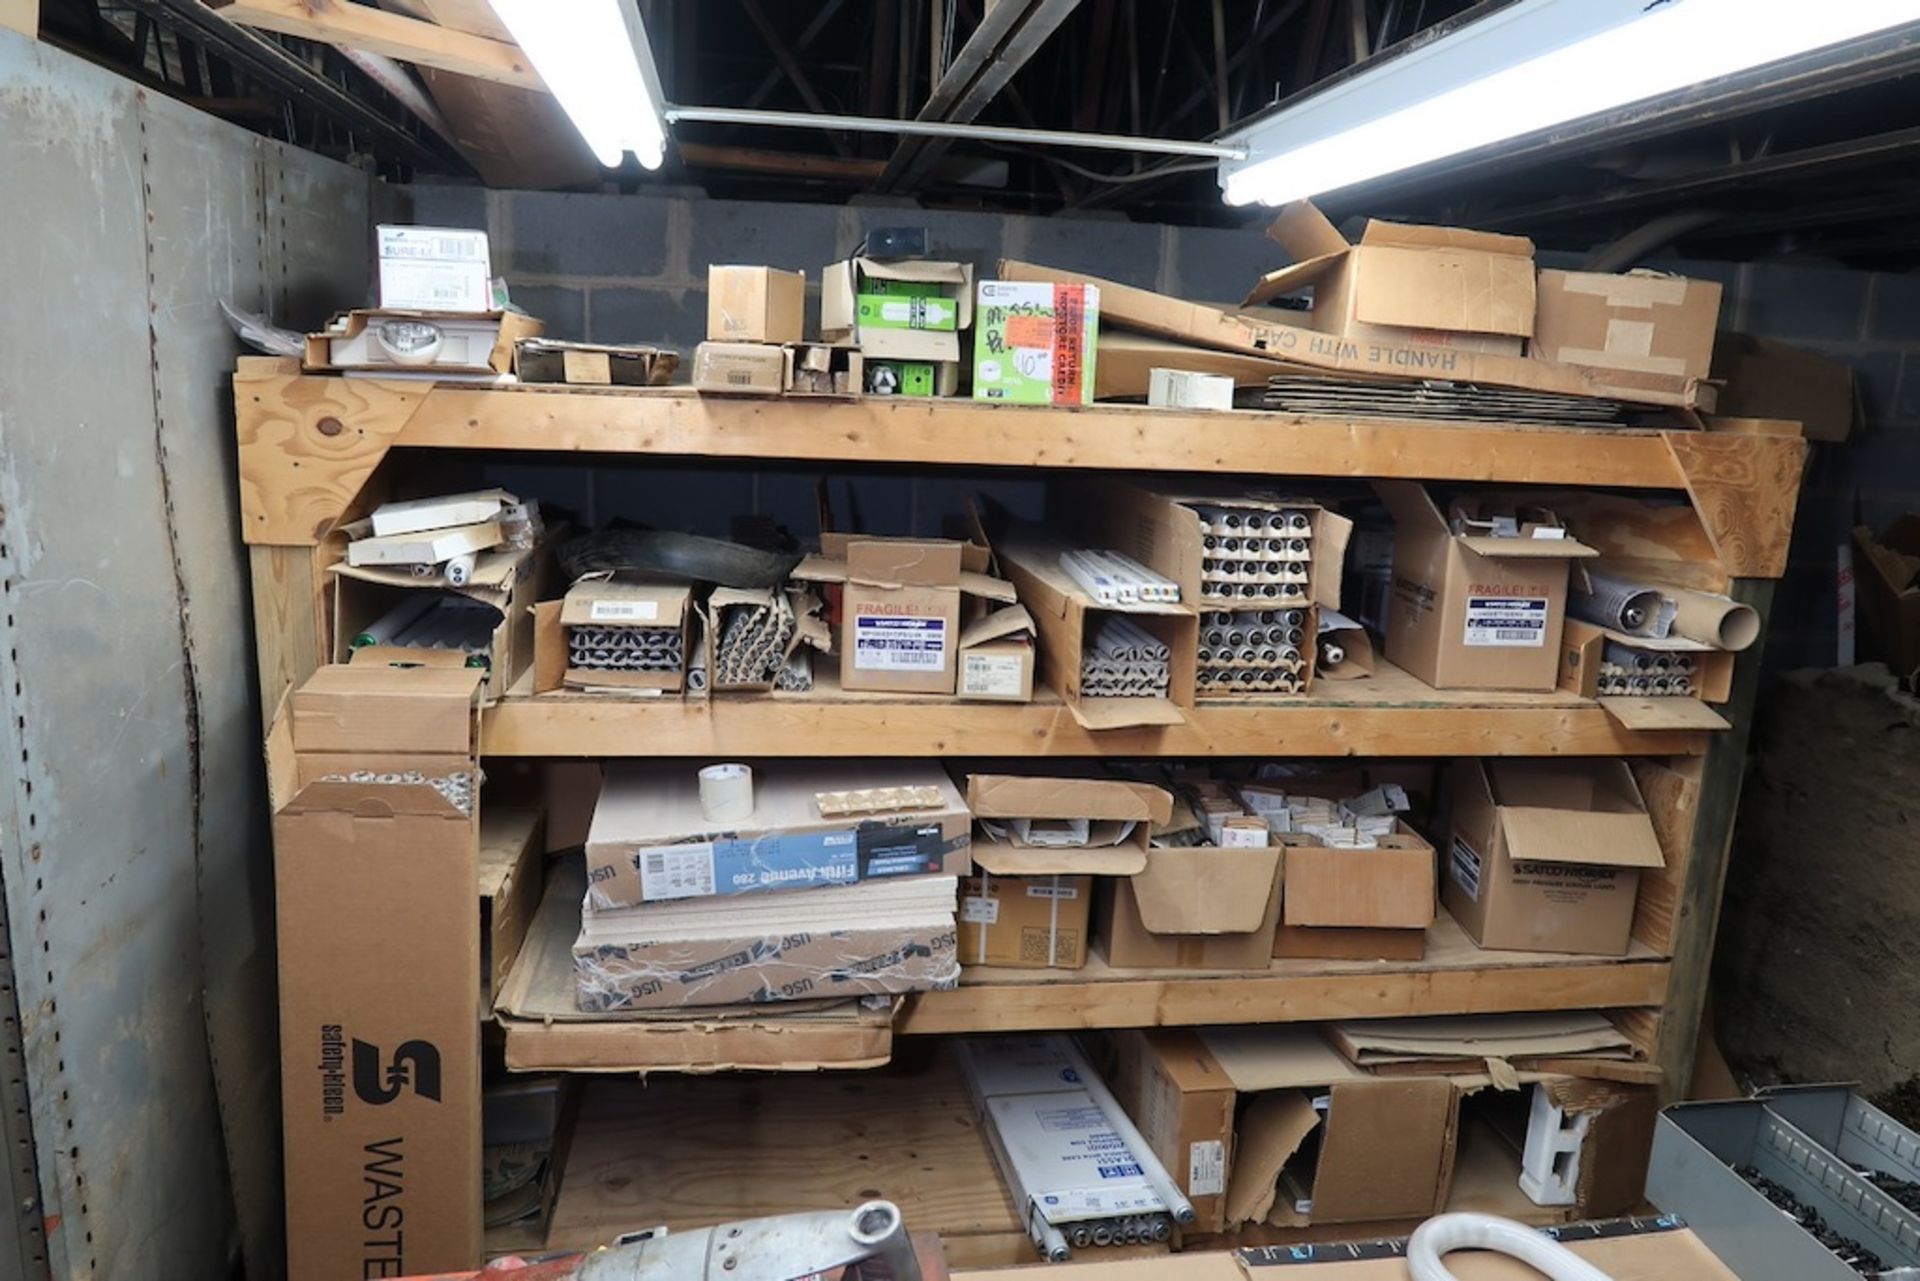 Remaining Contents of Under-Ramp Storage Room, Including Conveyor Parts and Rollers, Etc. - Image 15 of 21